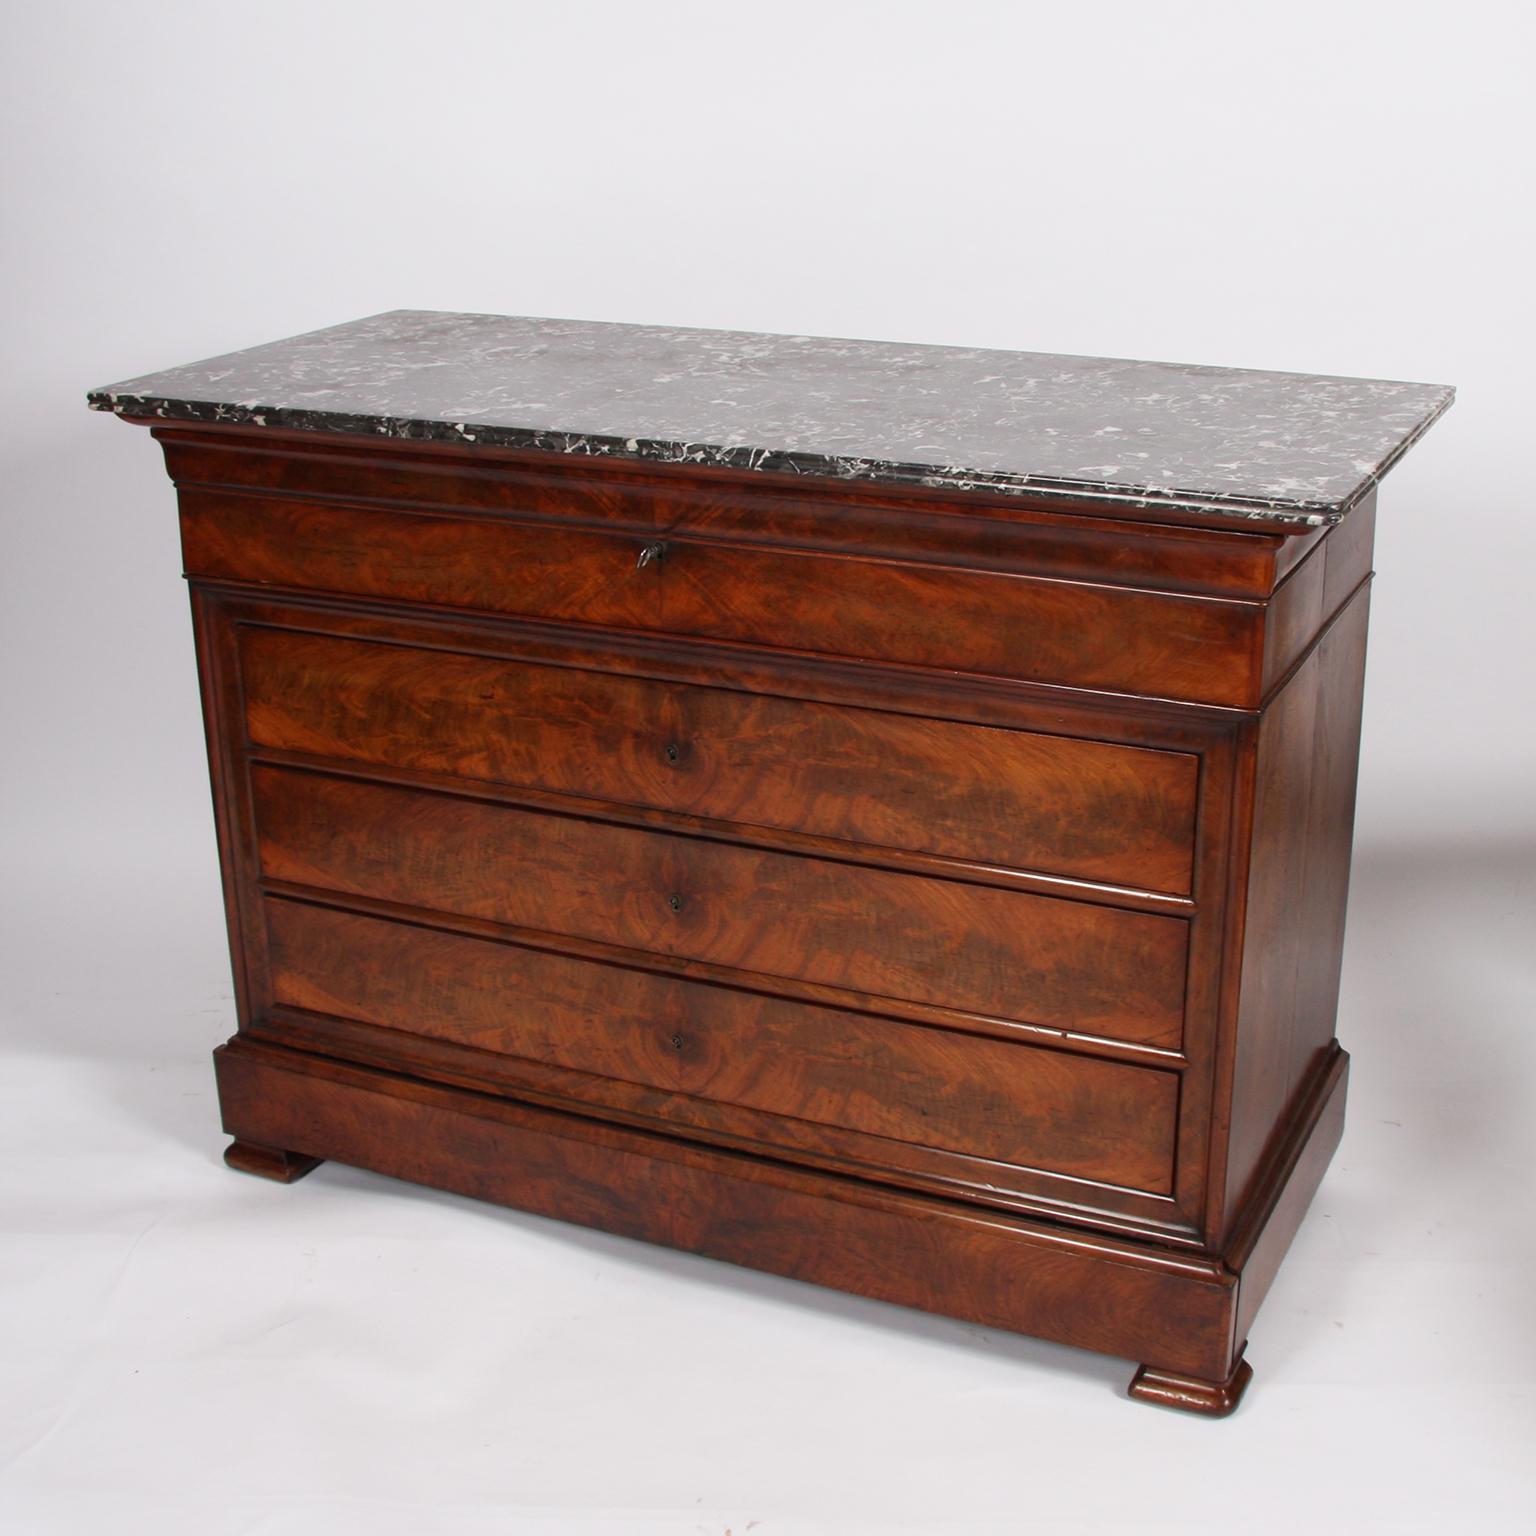 19th Century French Marble-Top Secretaire Chest with Leather Writing Surface 5